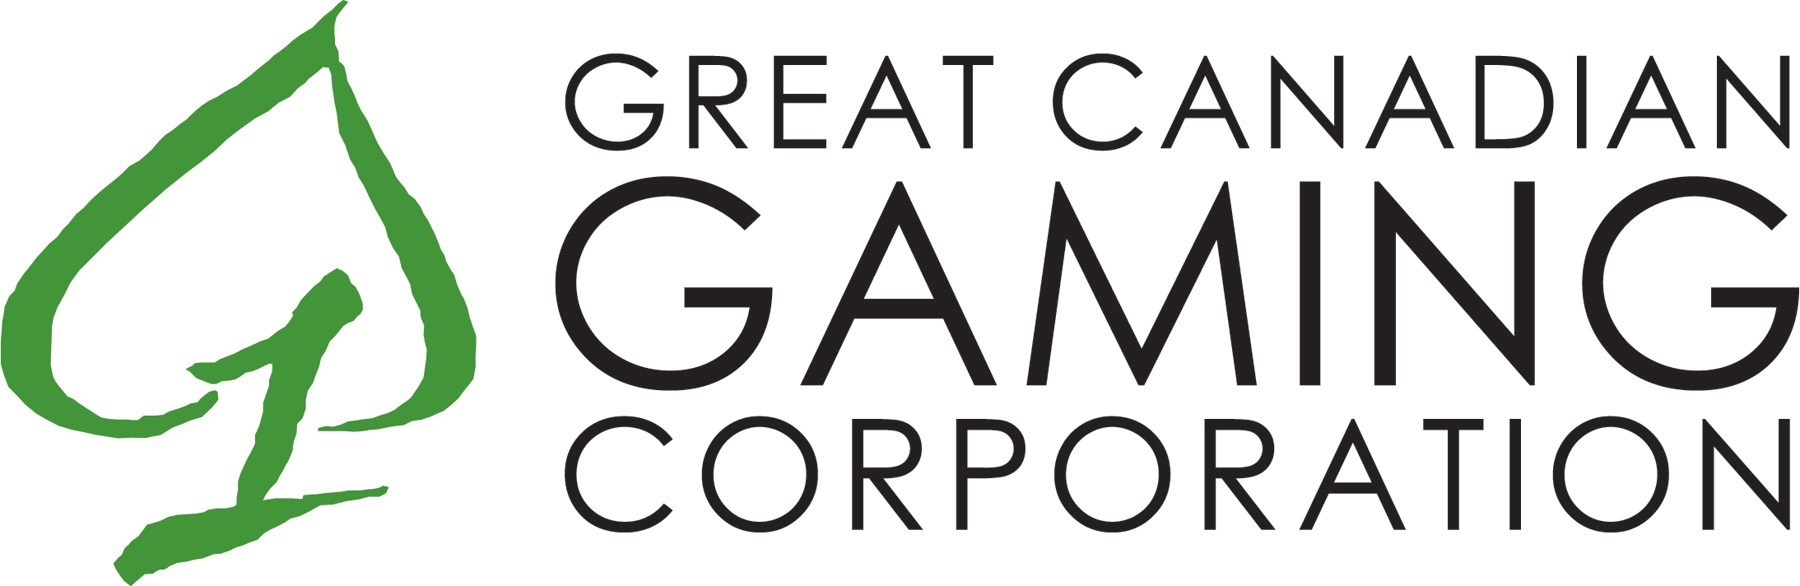 Canadian Gaming Corporation